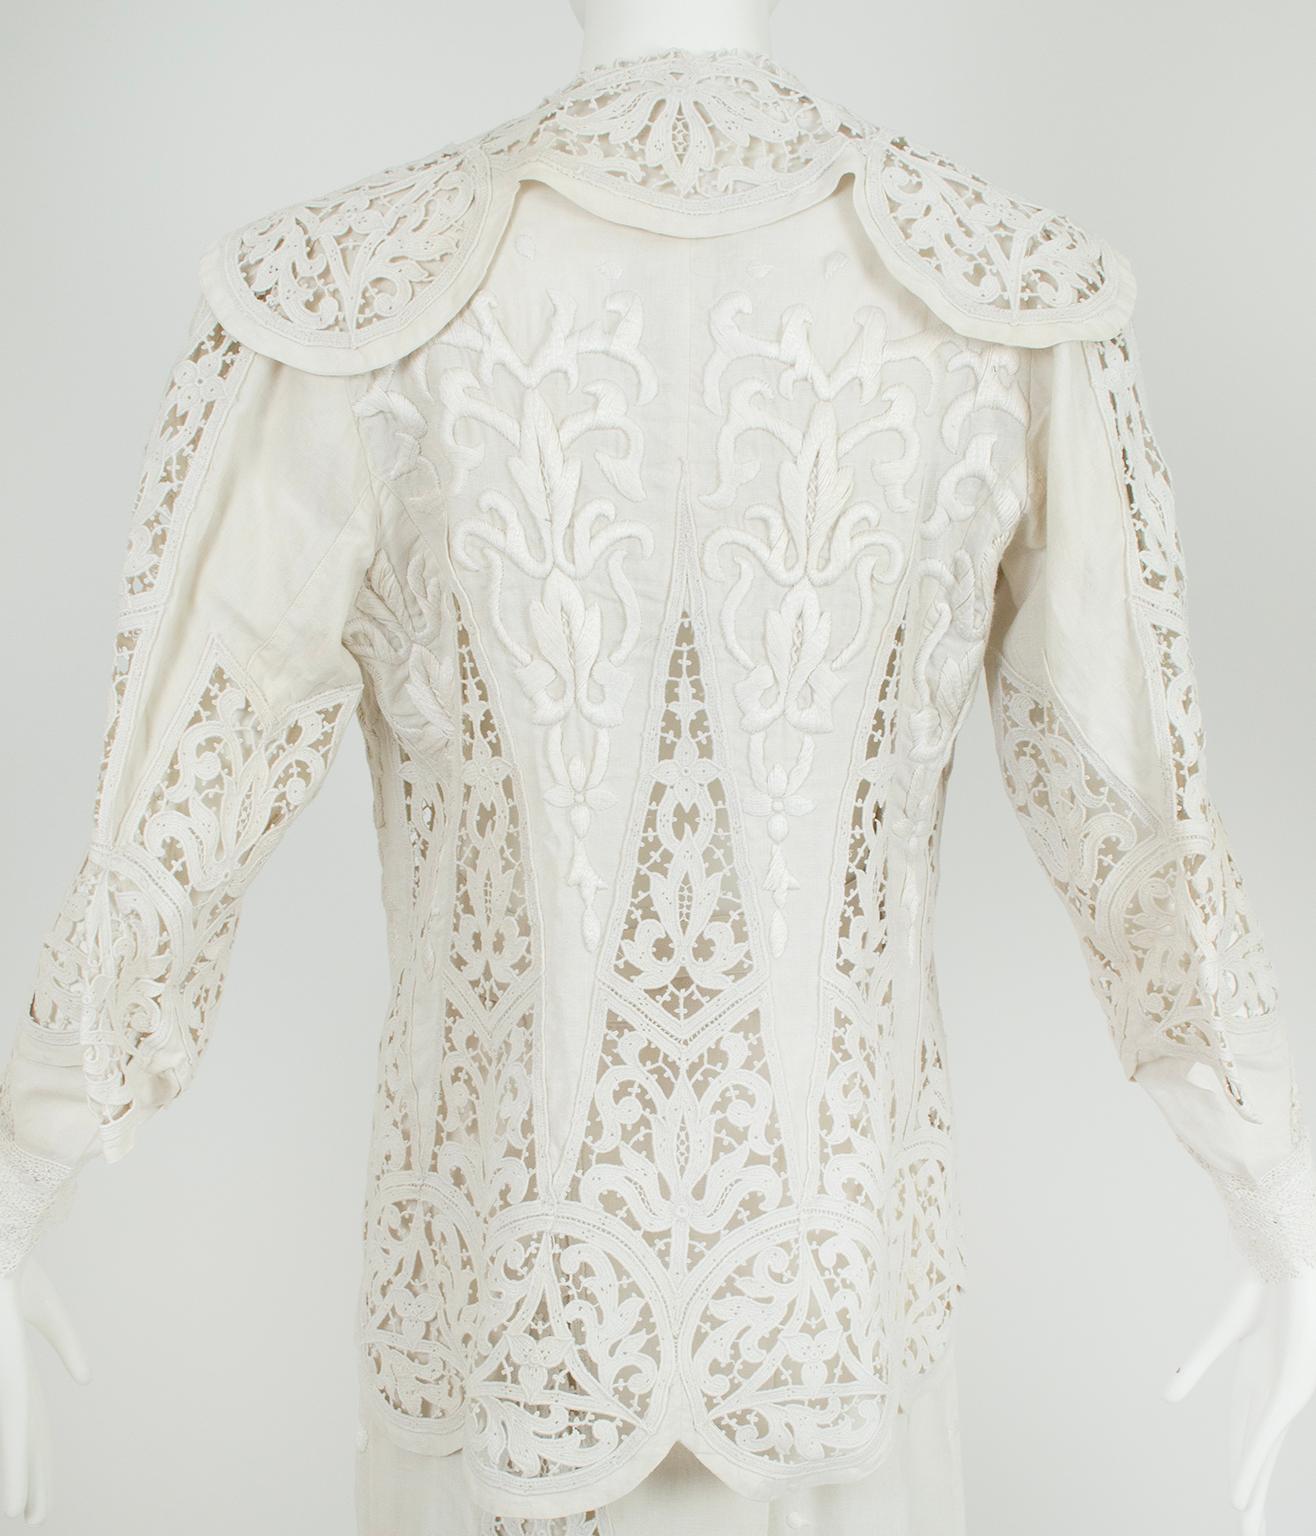 Edwardian White Irish Crochet and Cotton Walking or Wedding Suit – L, 1900s For Sale 2